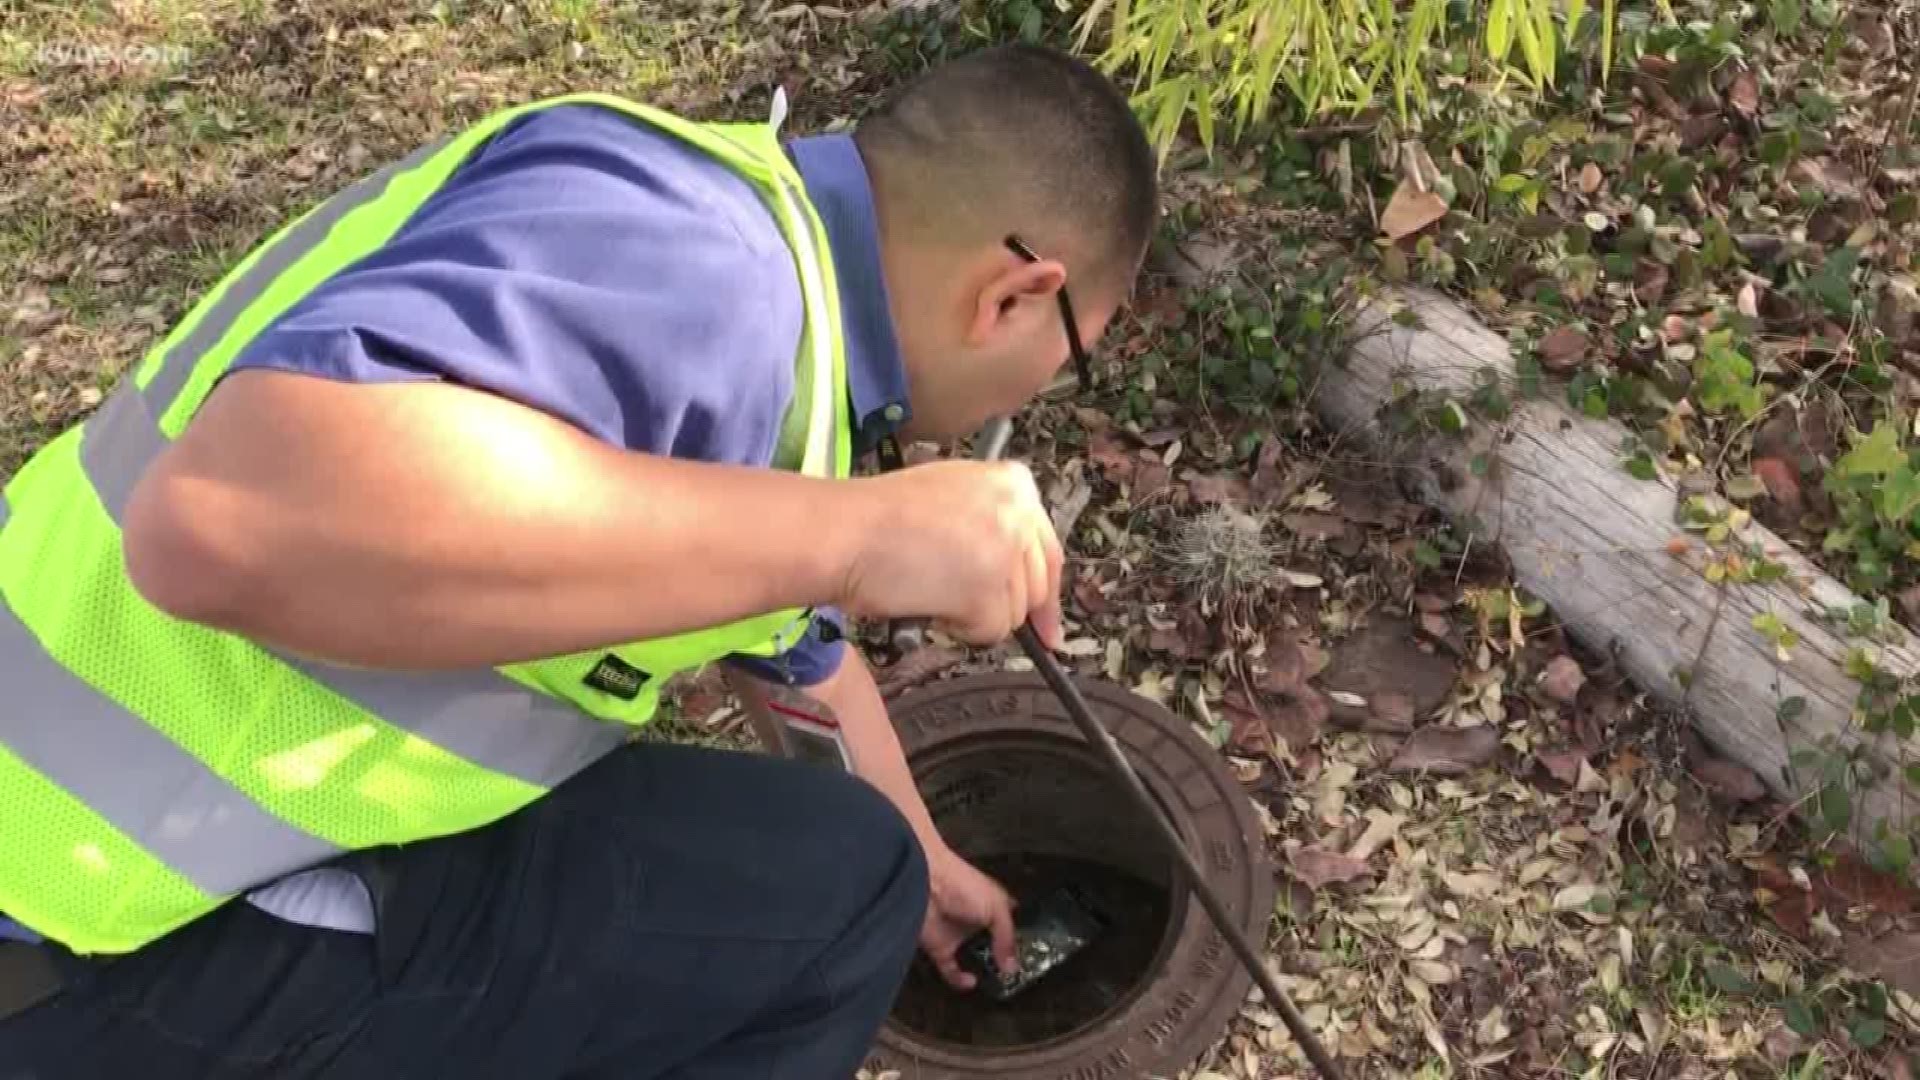 The City of Austin will credit approximately $138,000 to customers after a detailed investigation found water meter reading problems.